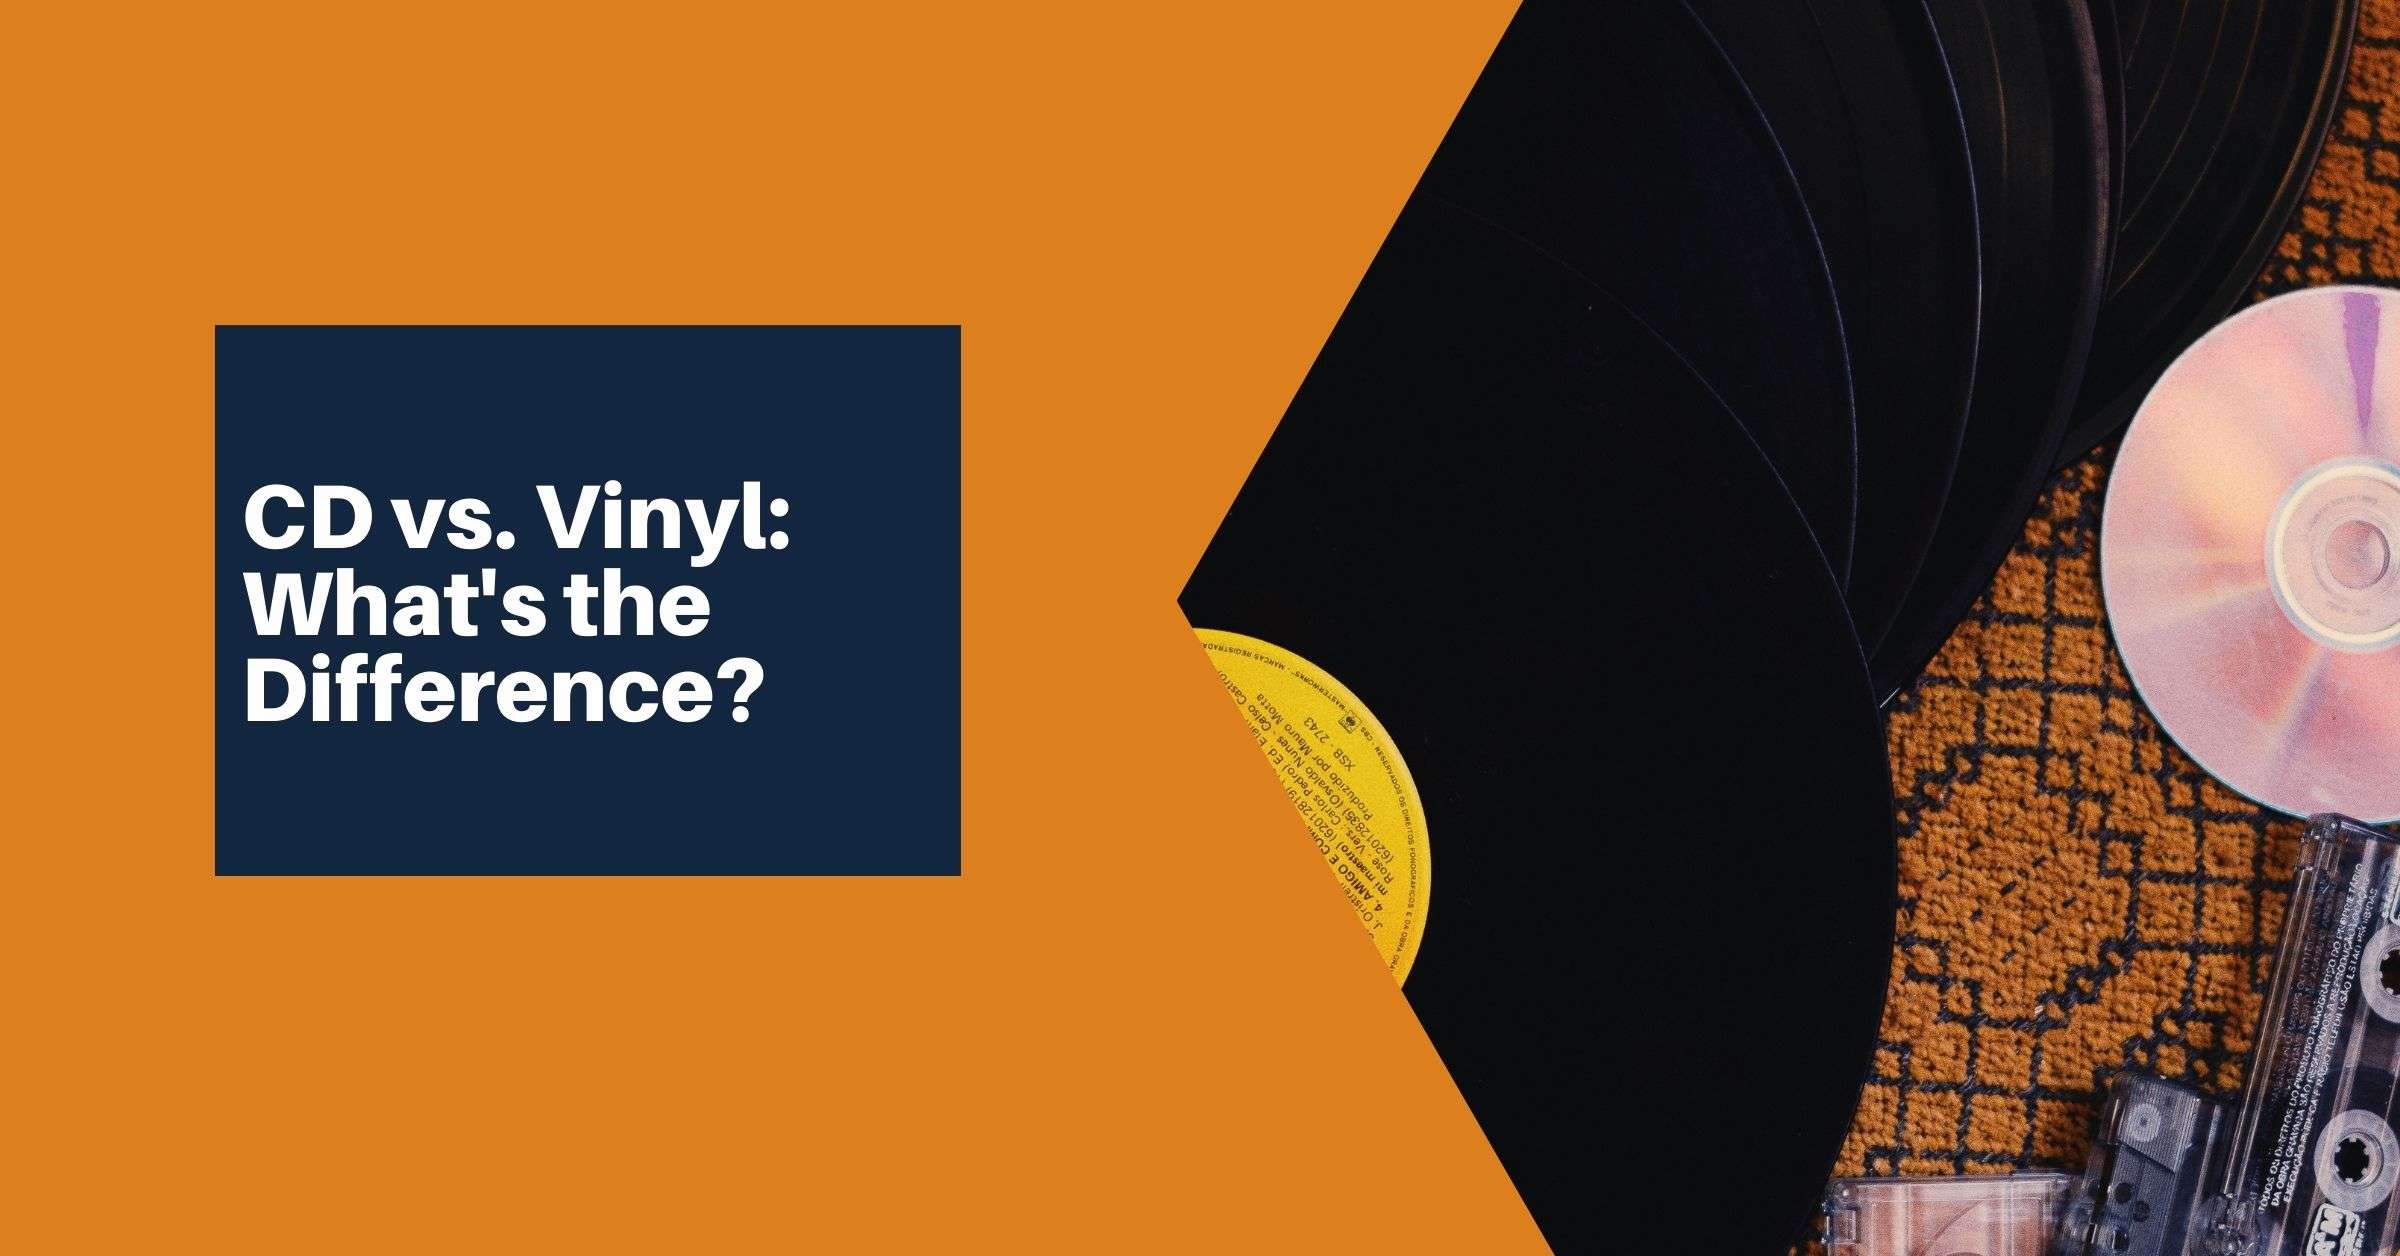 The difference between vinyl records and CDs